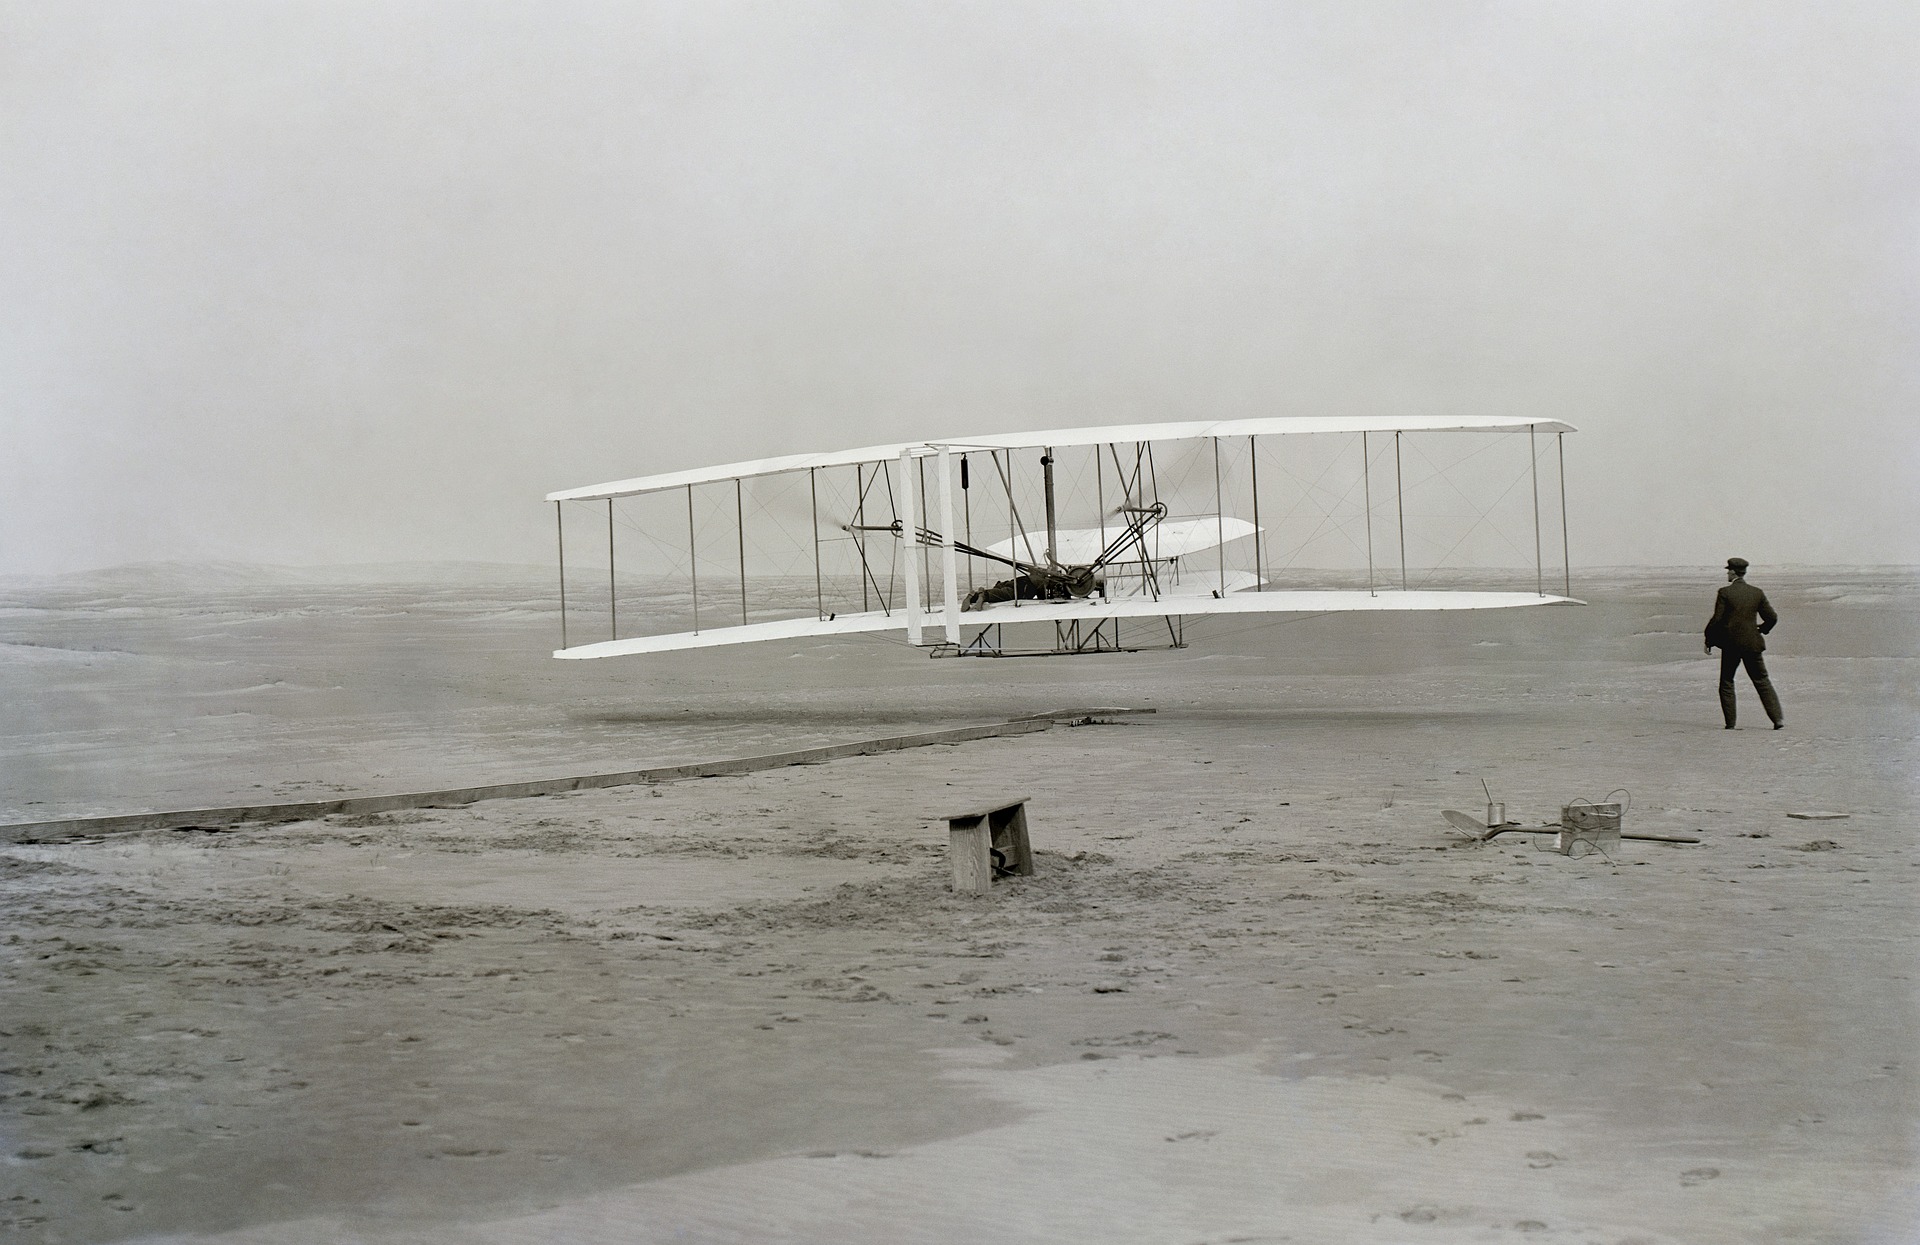 The Wright brothers' Flyer taking off at Kitty Hawk, North Carolina.